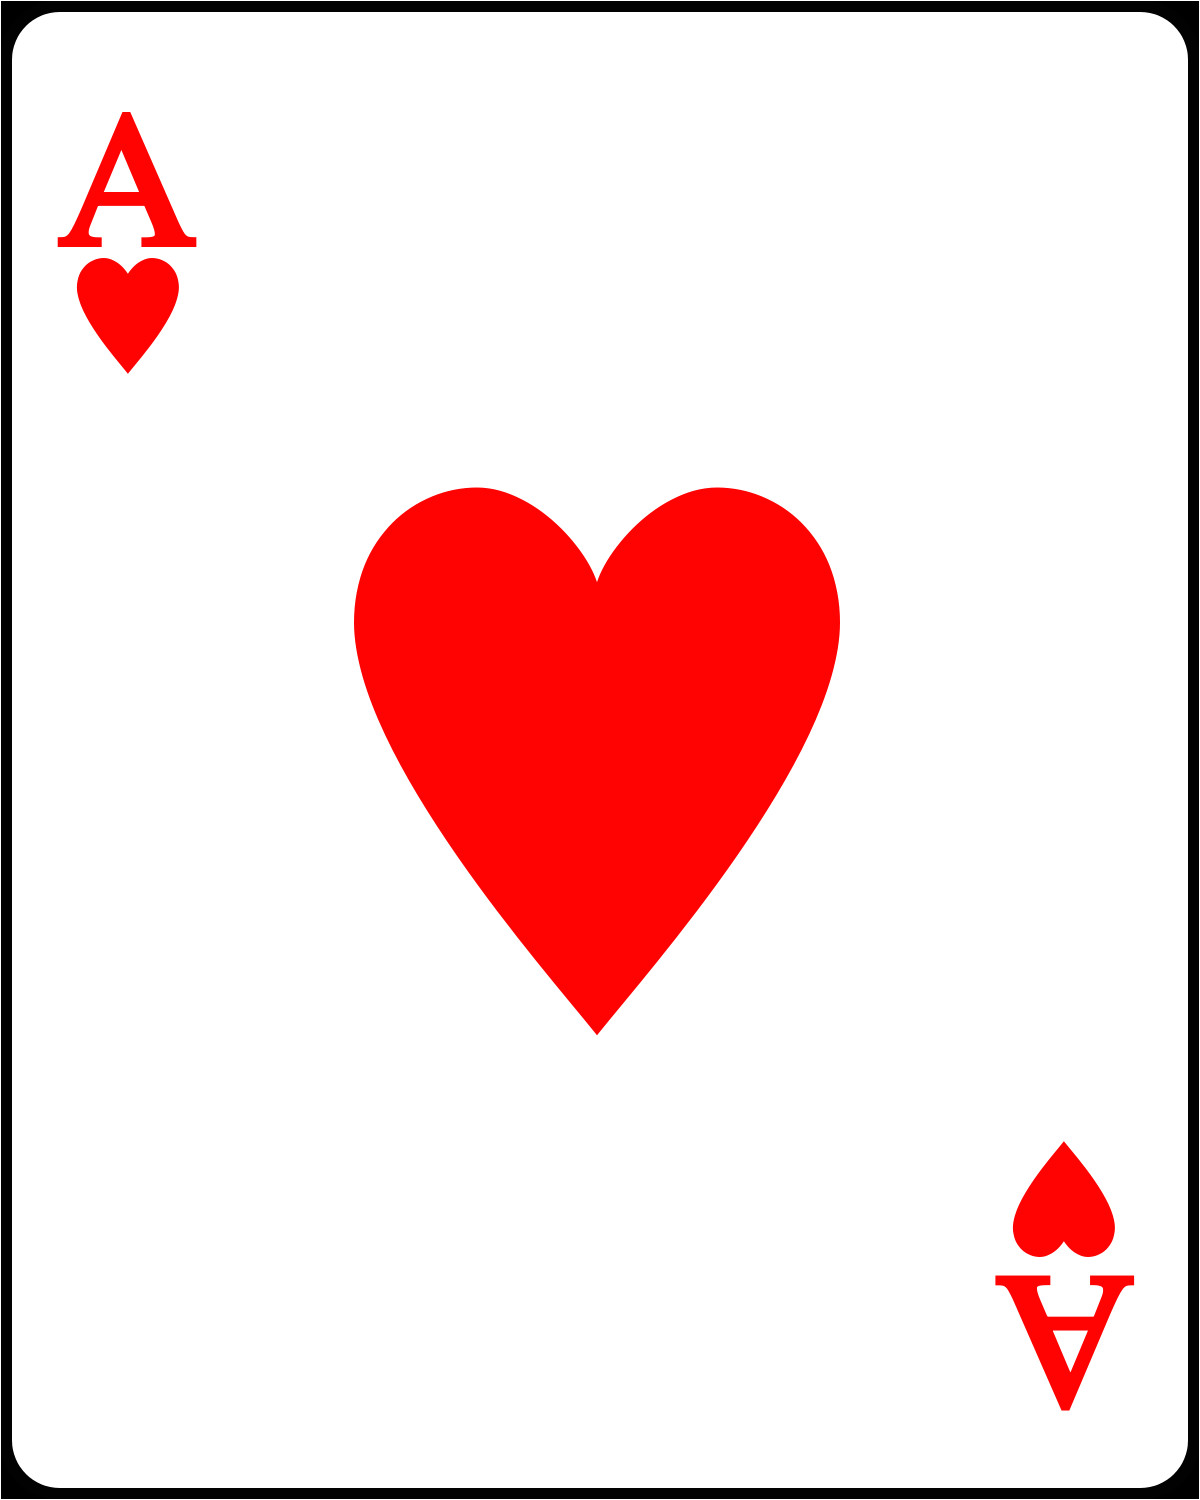 Blank Queen Of Hearts Card Image Result for Playing Card Template Ace Hearts Playing